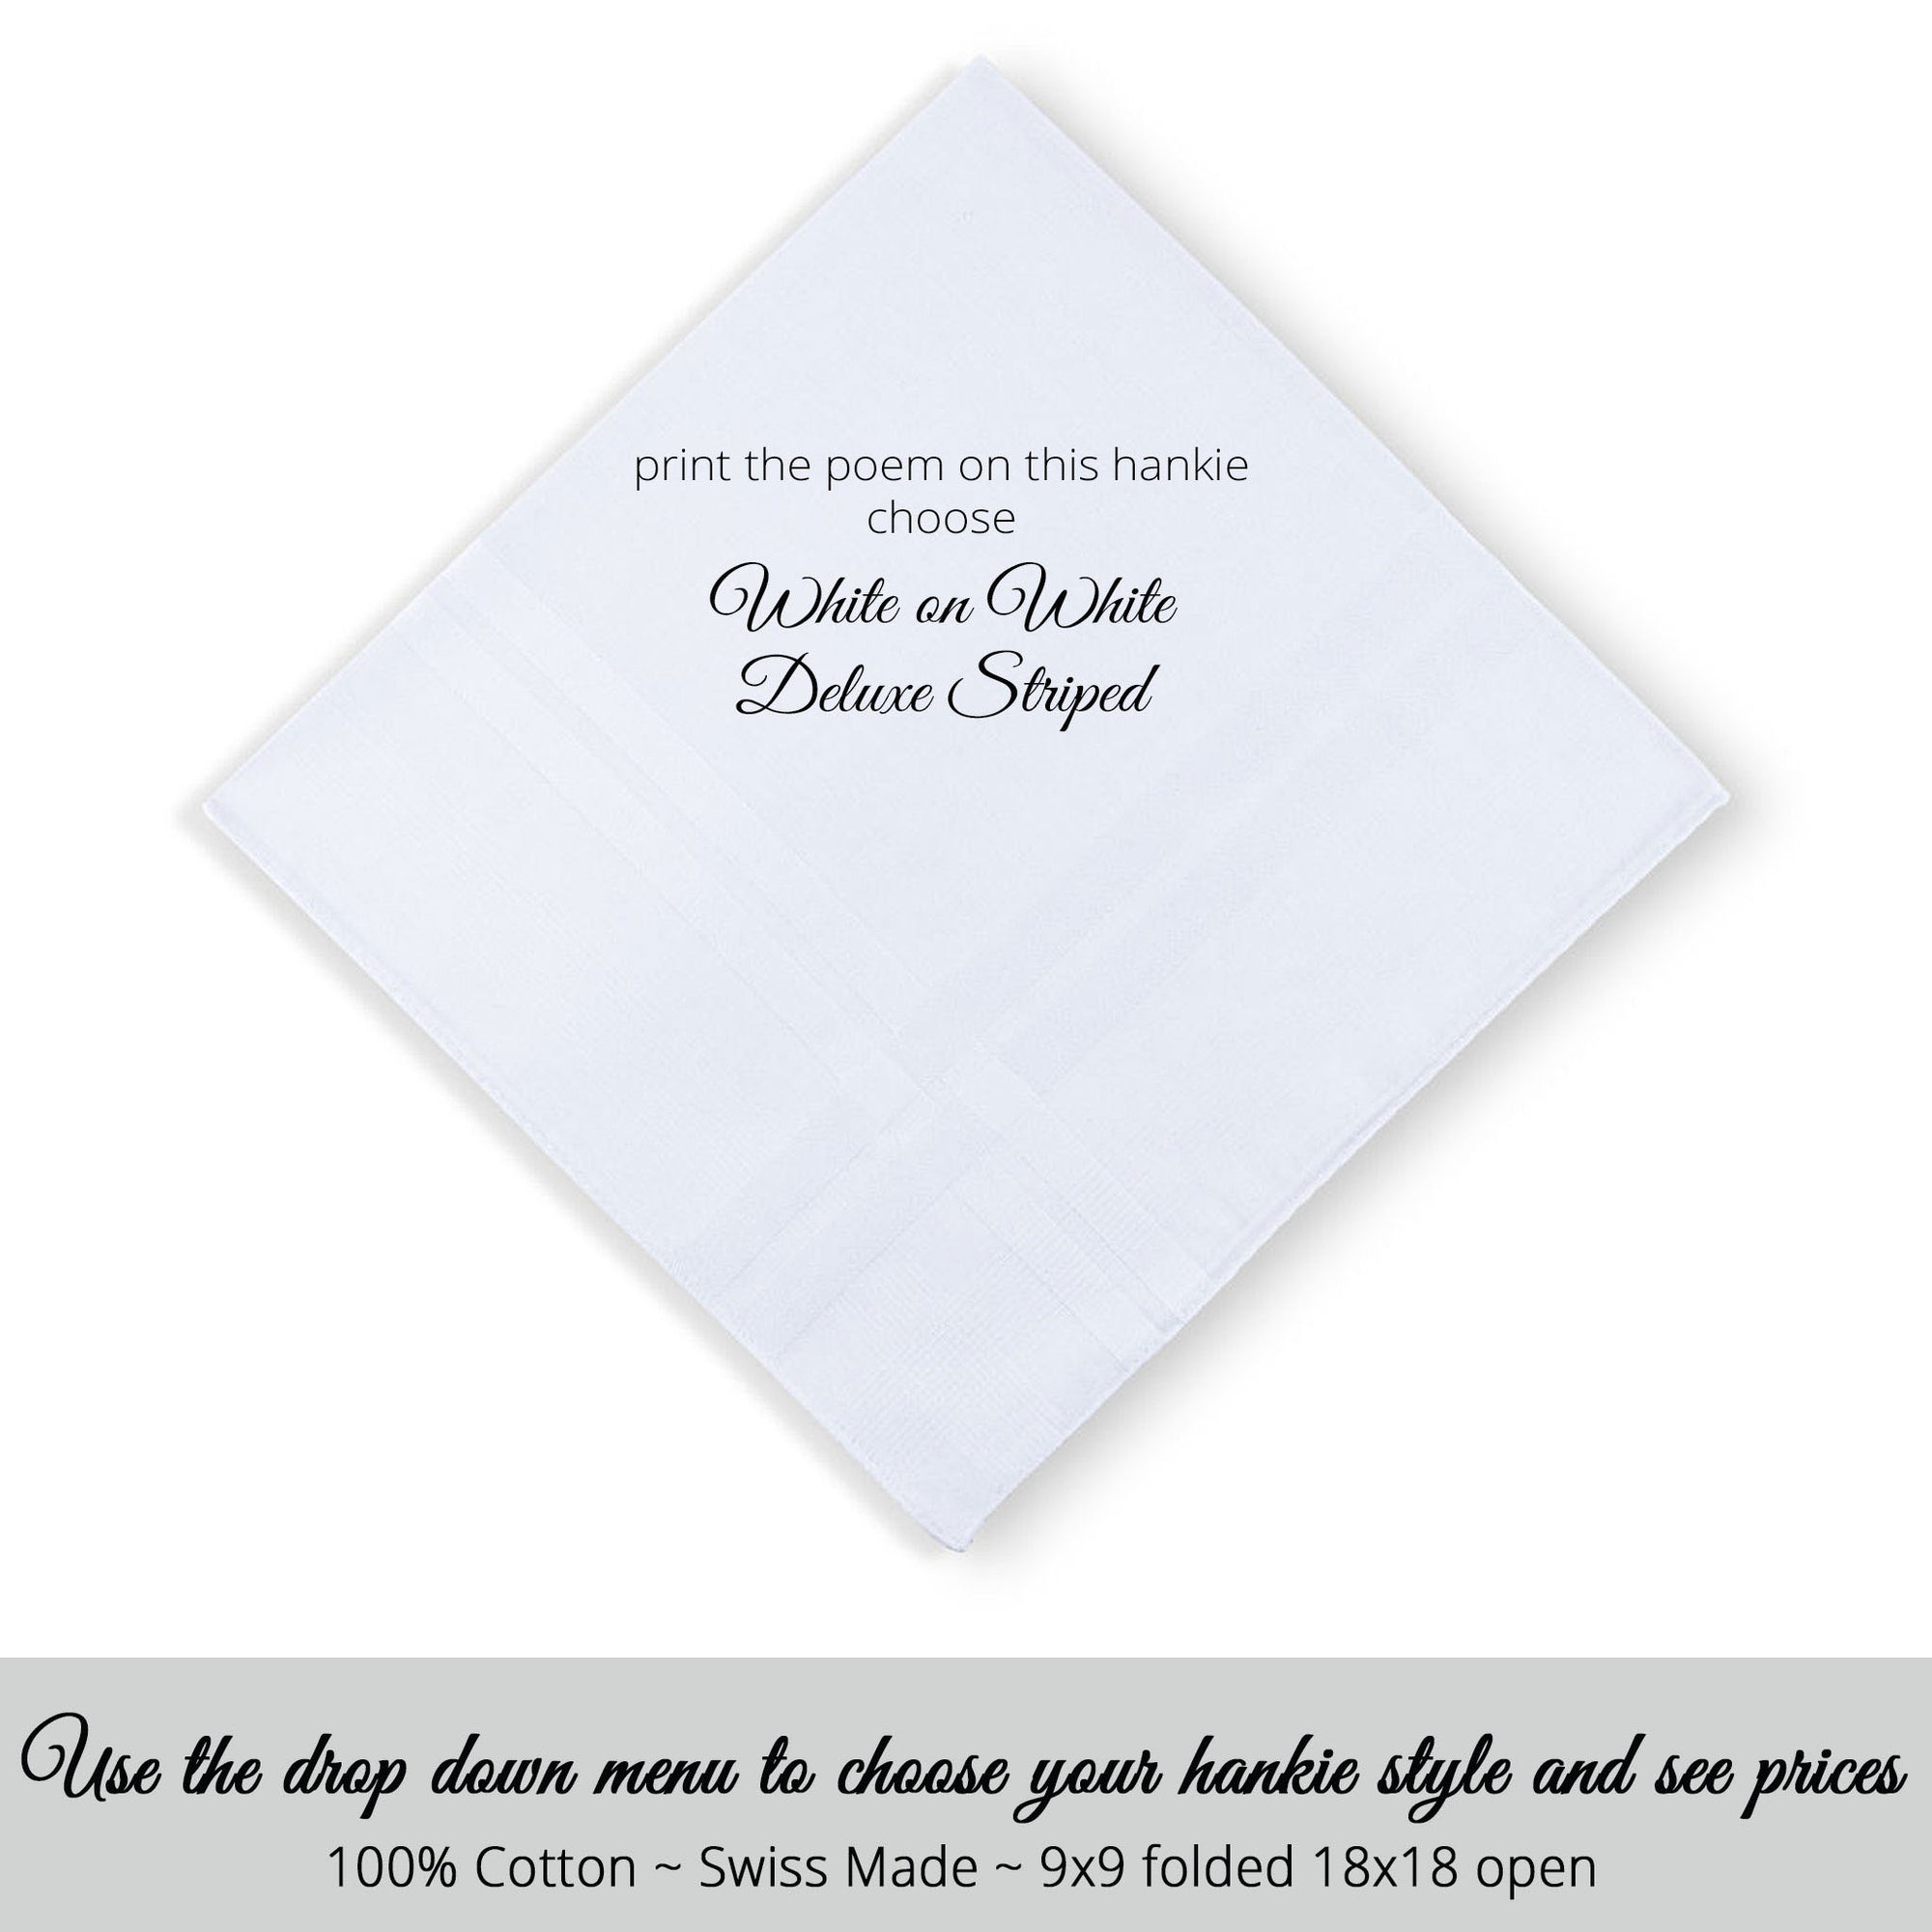 Father of the Bride Gift.  Masculine Hankie style Swiss made deluxe striped for poem printed hankie